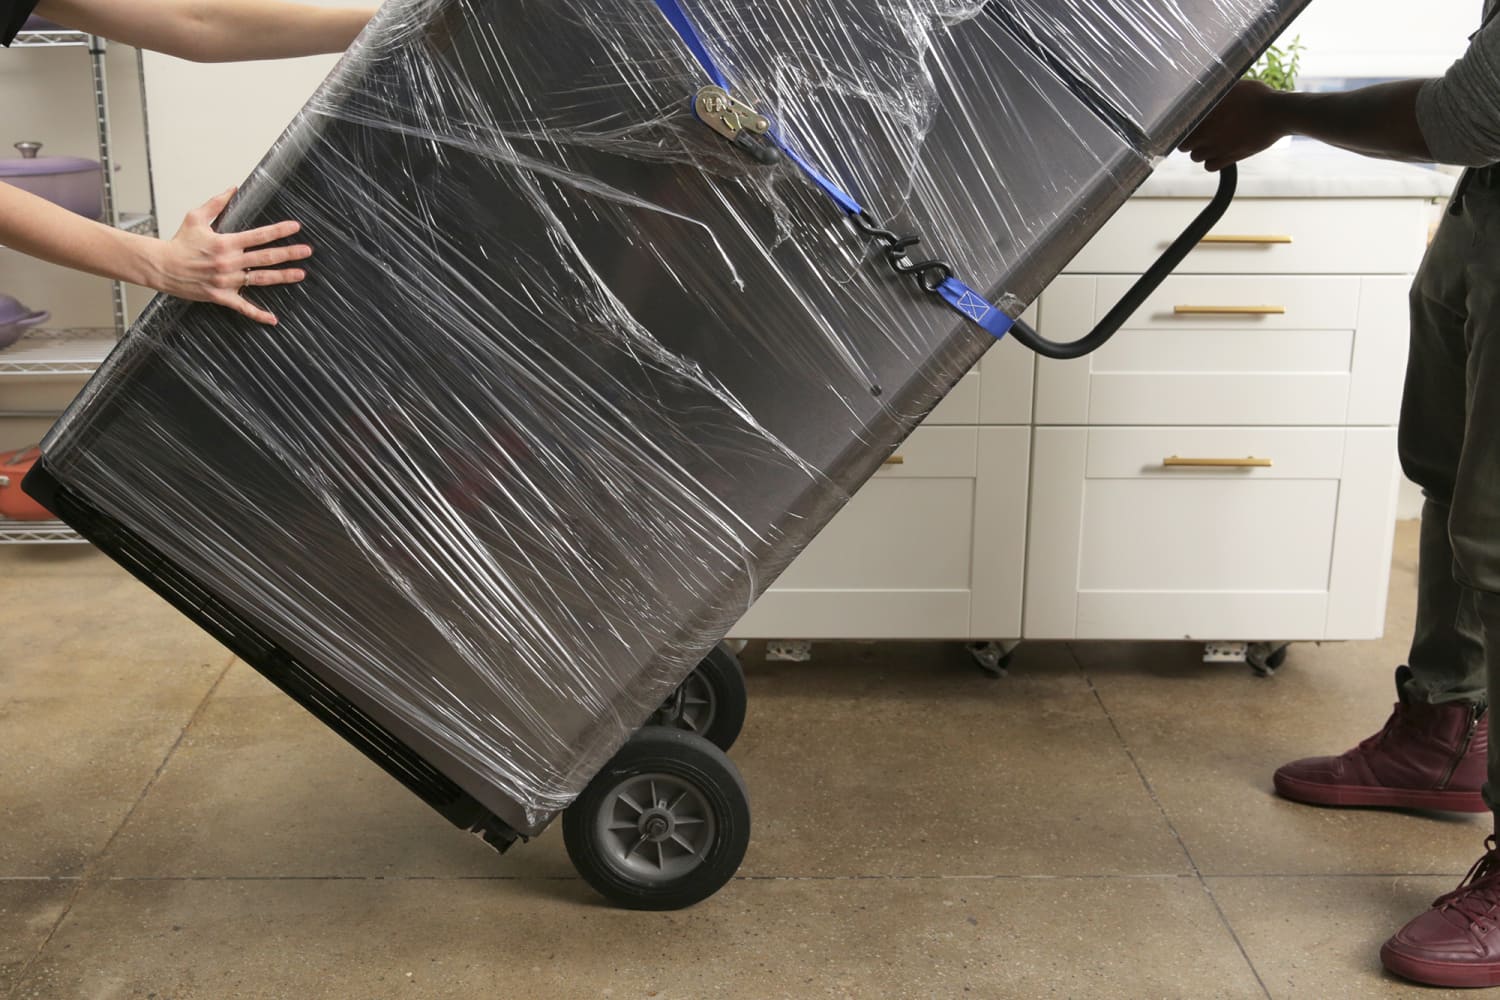 How to Move a Refrigerator Safely, According to Pro Movers | Apartment